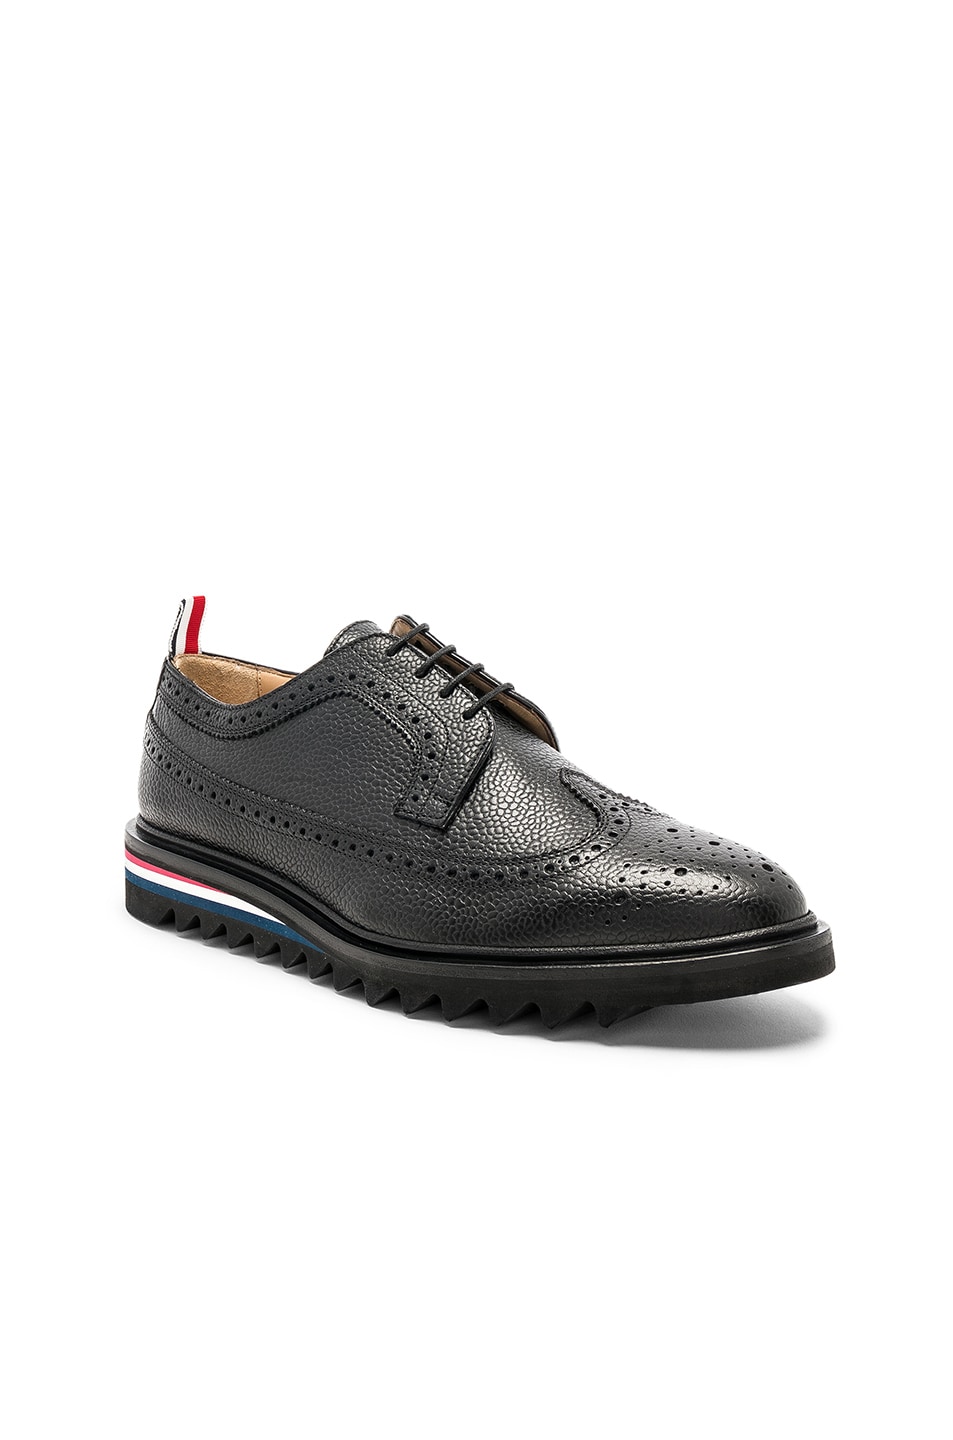 Image 1 of Thom Browne Pebble Grain Classic Longwing Brogue with Threaded Rubber Sole in Black